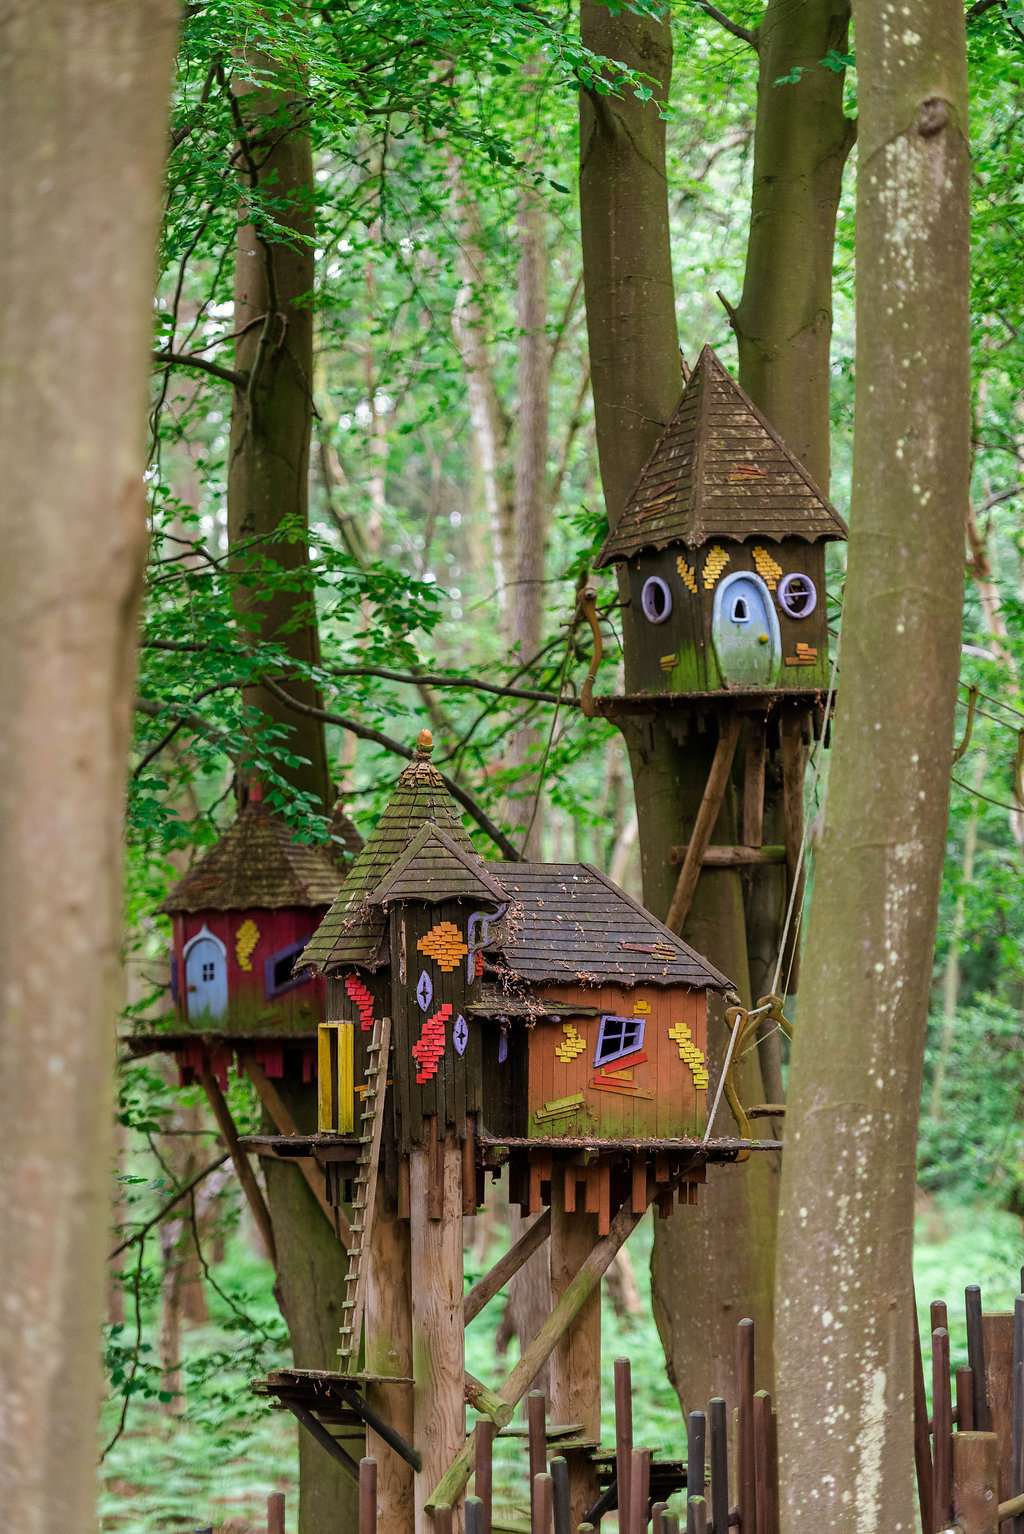 A new BeWILDerwood adventure park is set to open in Cheshire.